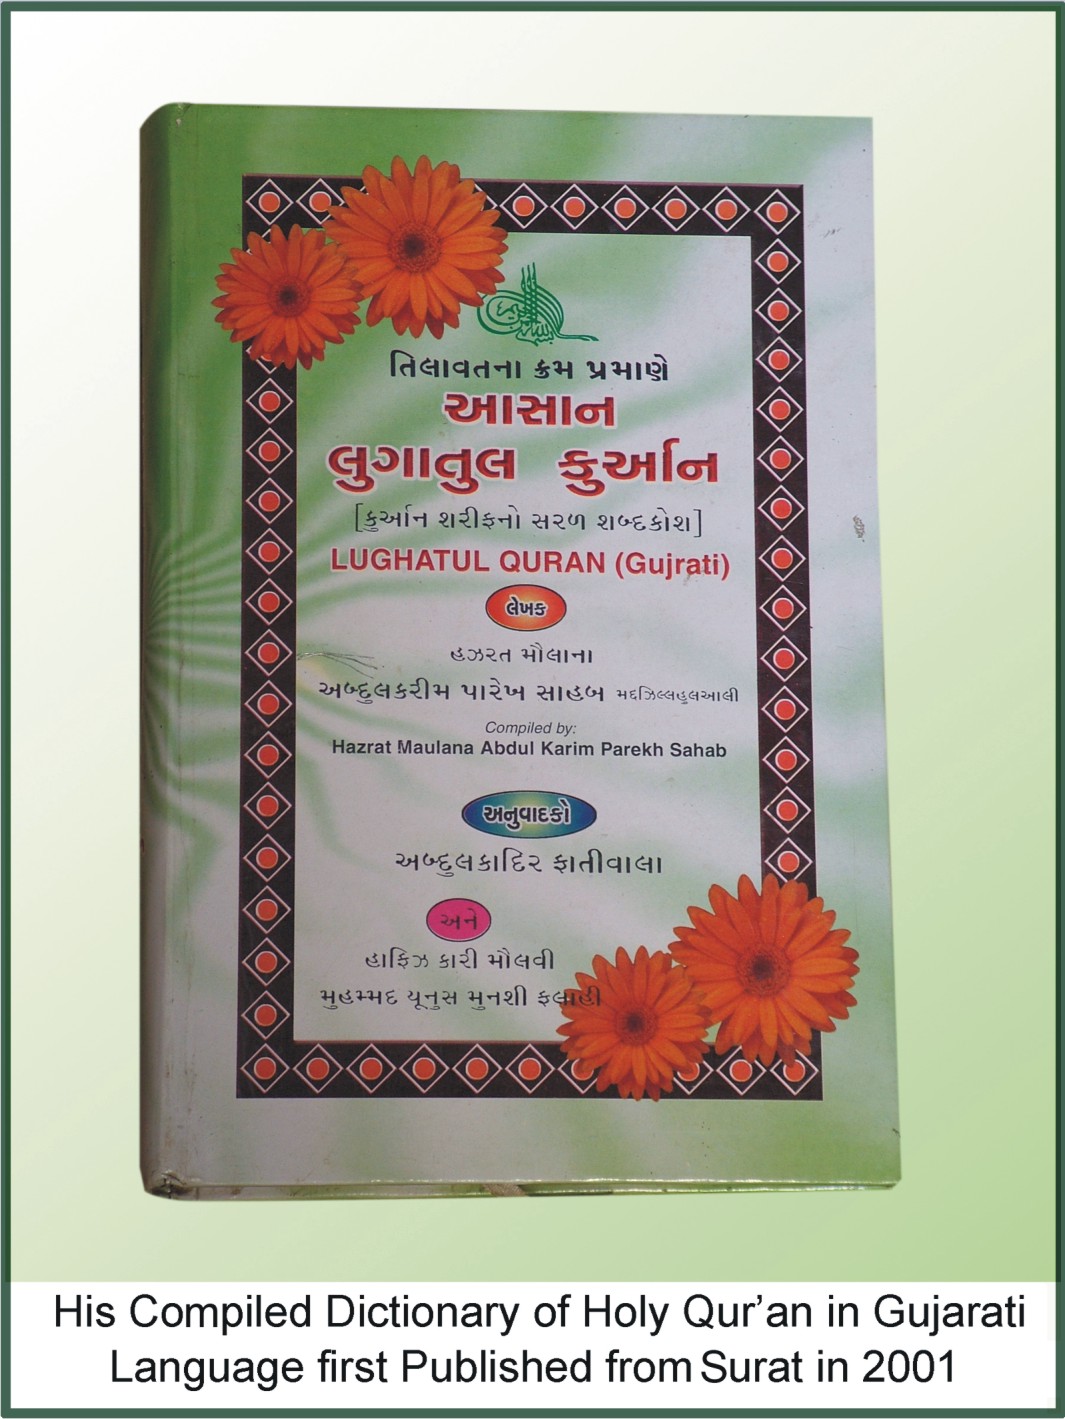 Compiled Dictionary of The Holy Qur'an (Gujarati) First Published from Surat in 2001